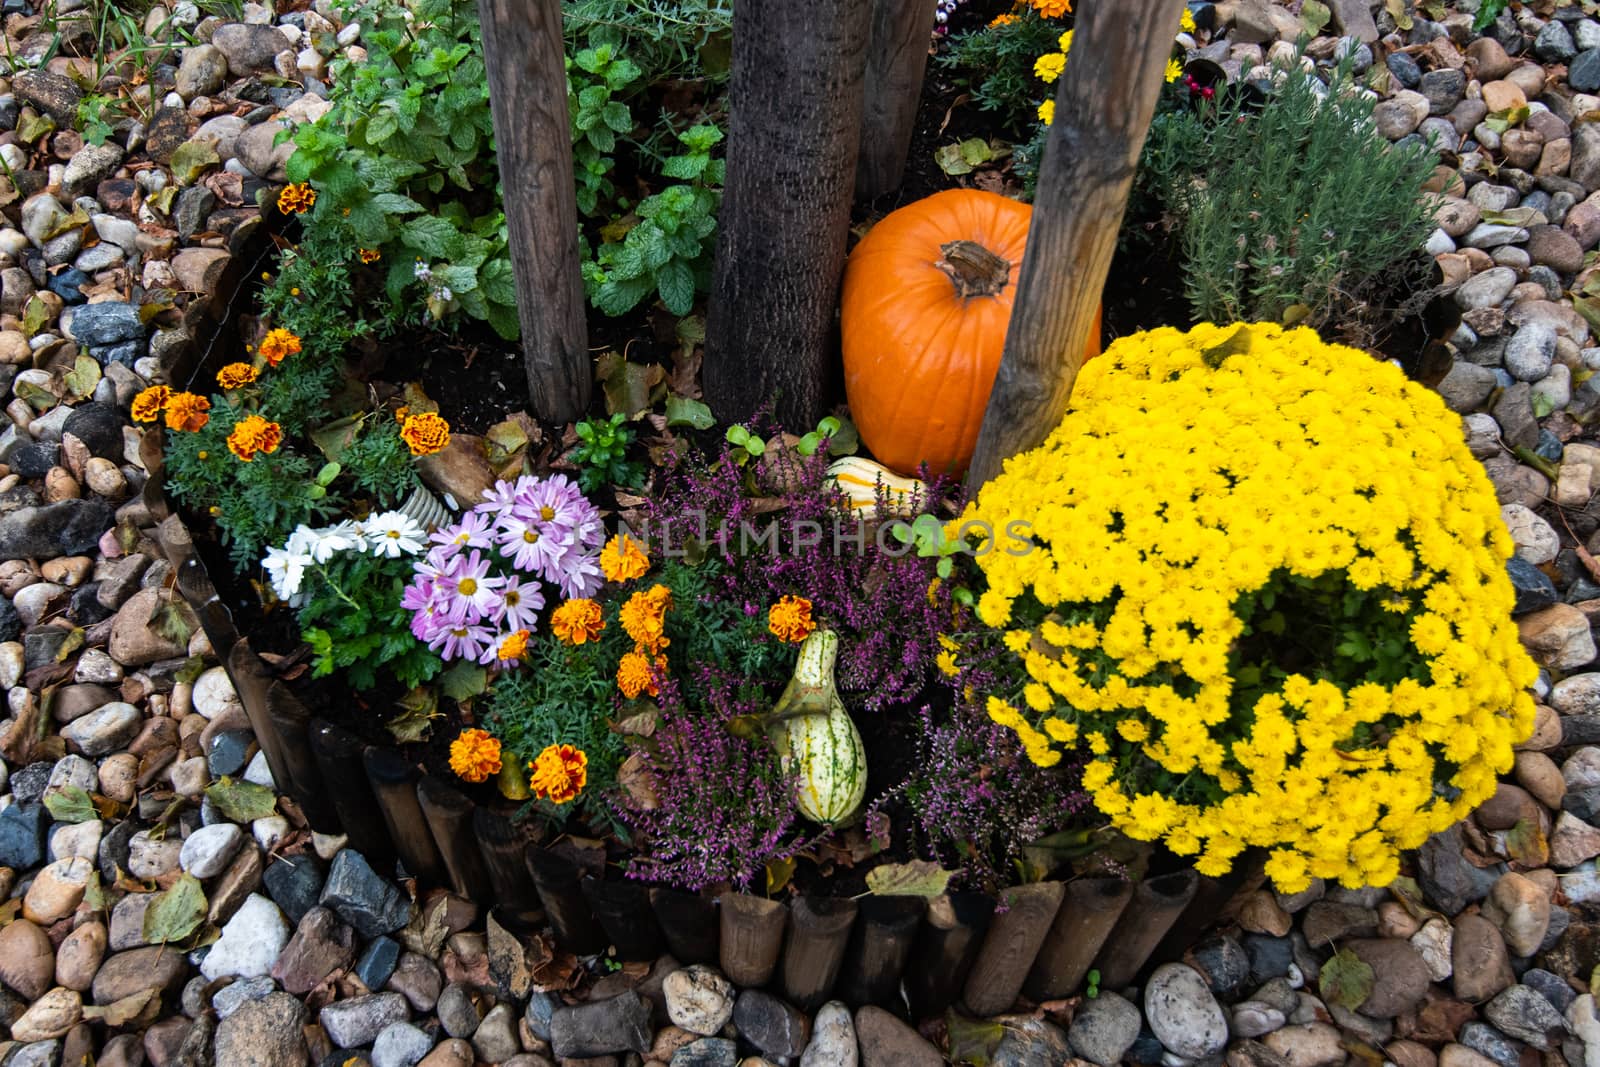 Flower and vegetables arrangements for halloween. by gonzalobell